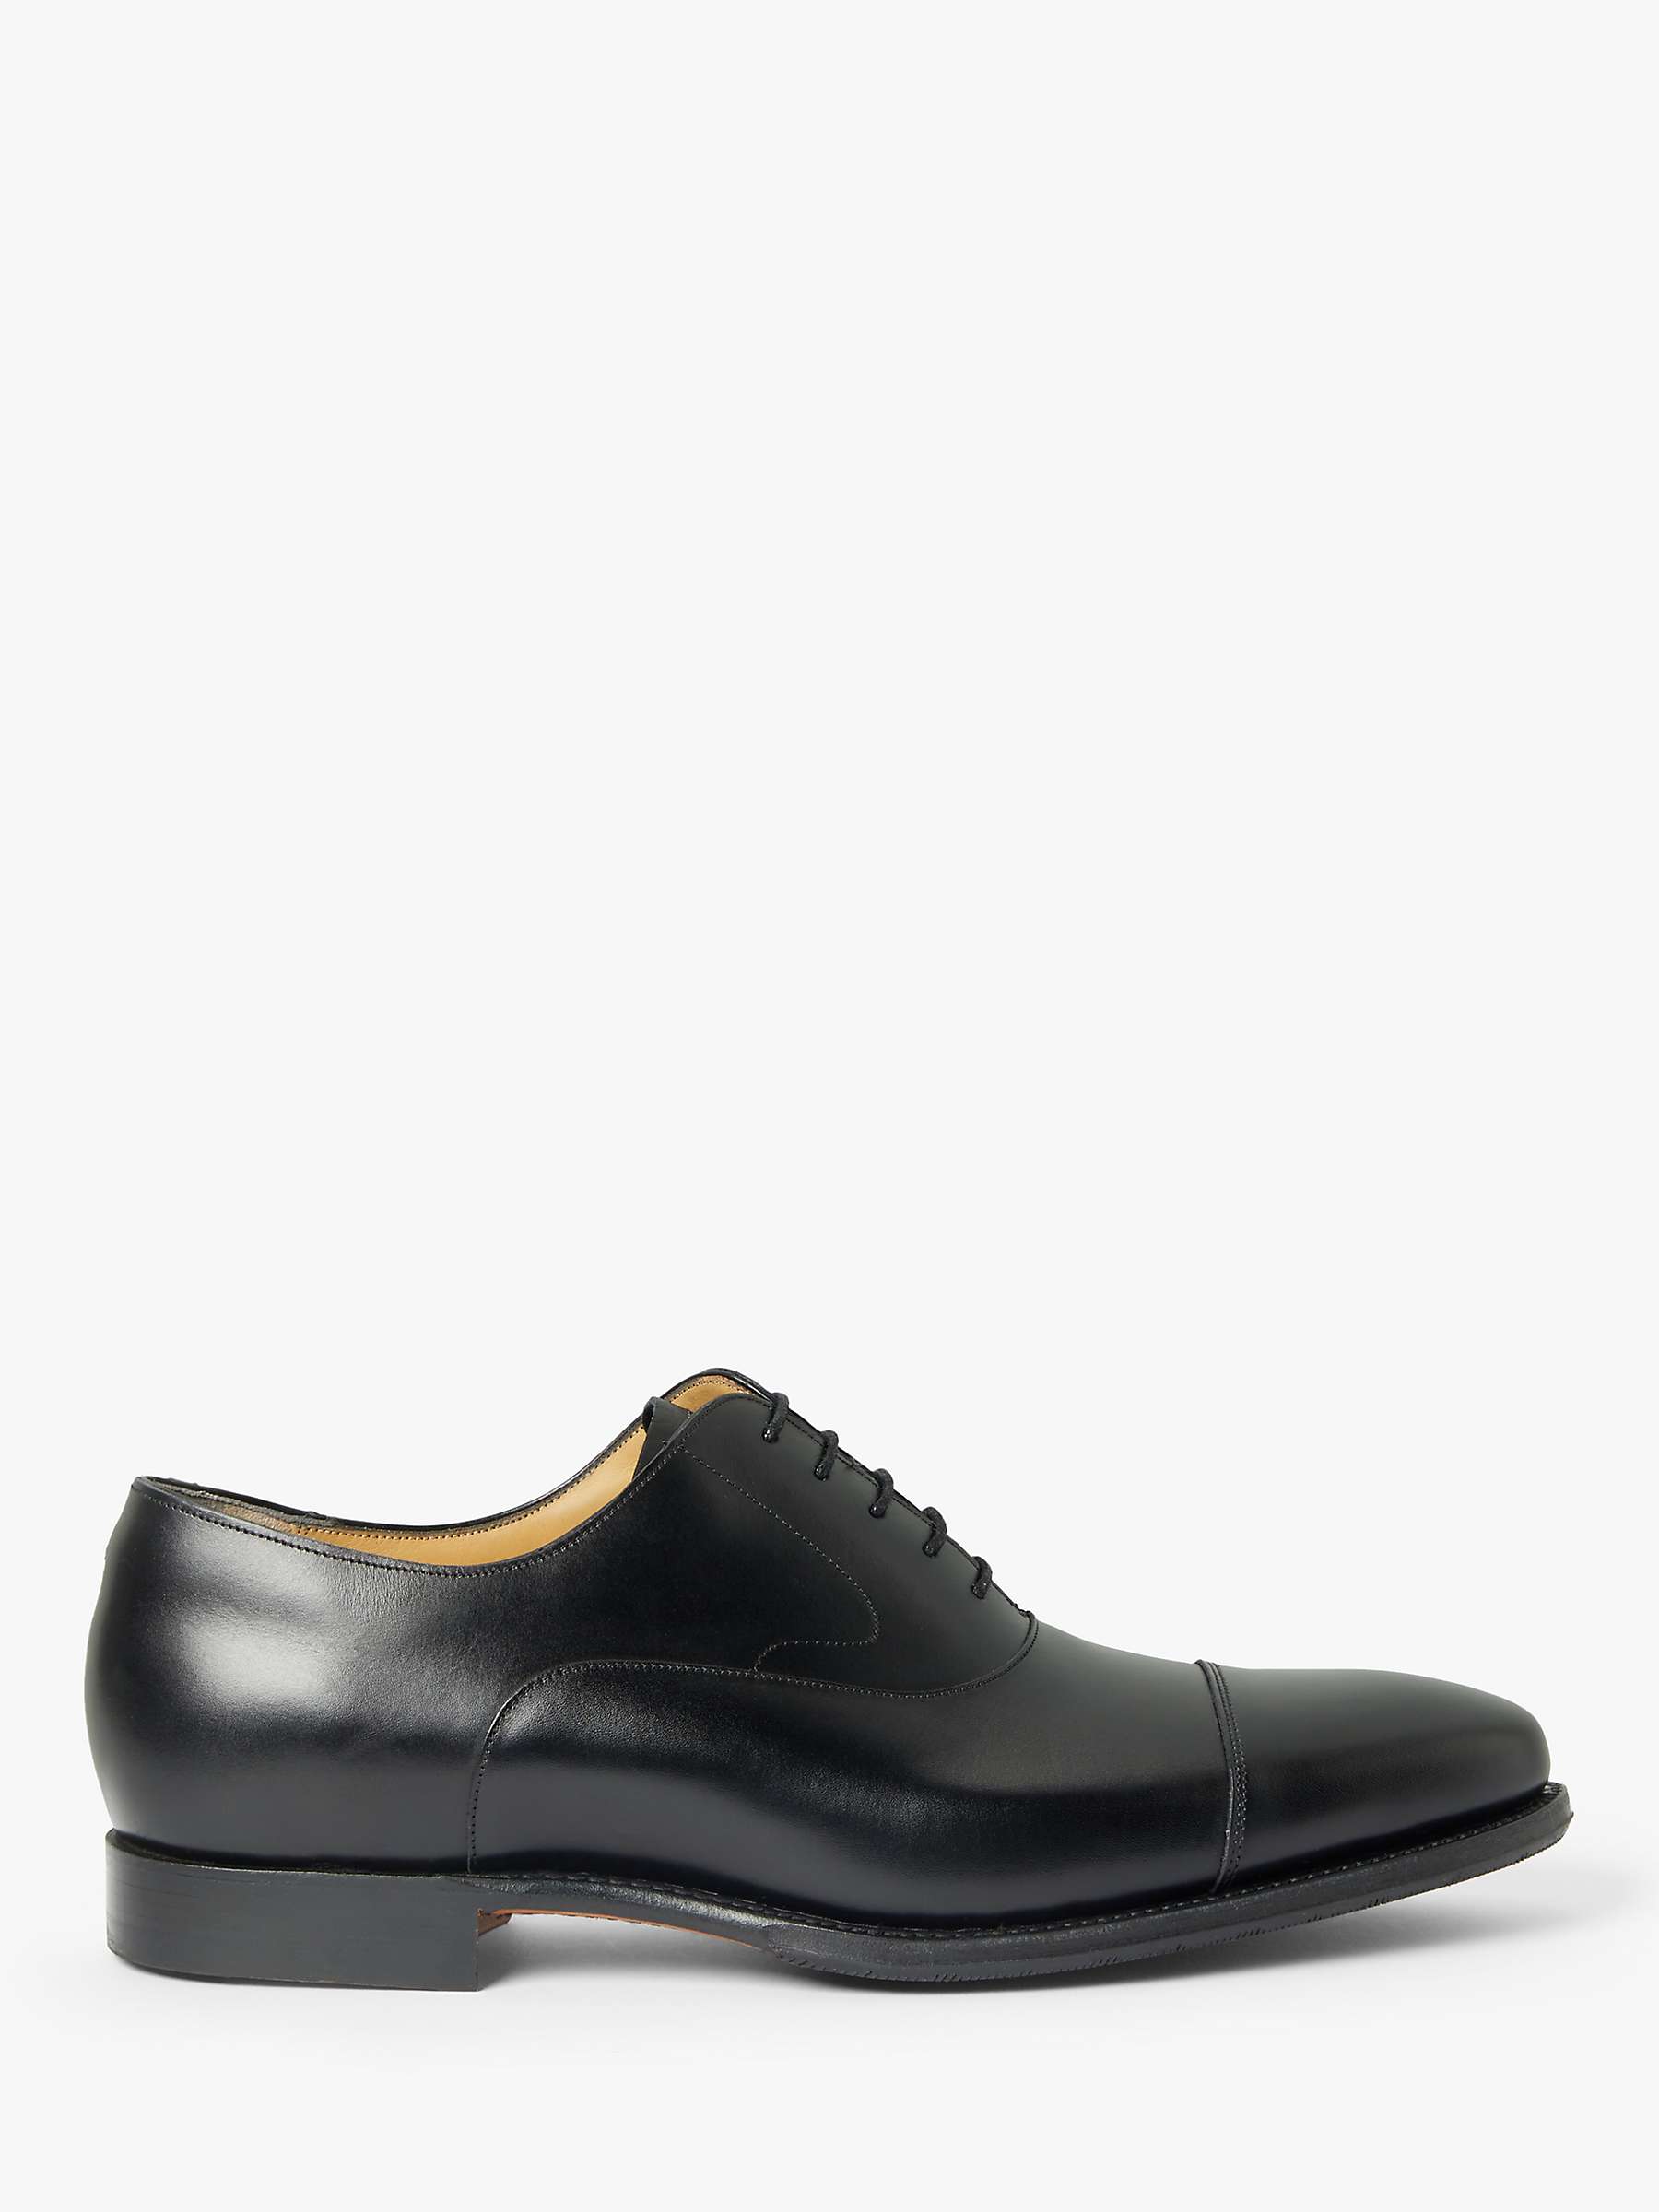 Buy Barker Tech Wright Leather Oxford Shoes, Black Online at johnlewis.com